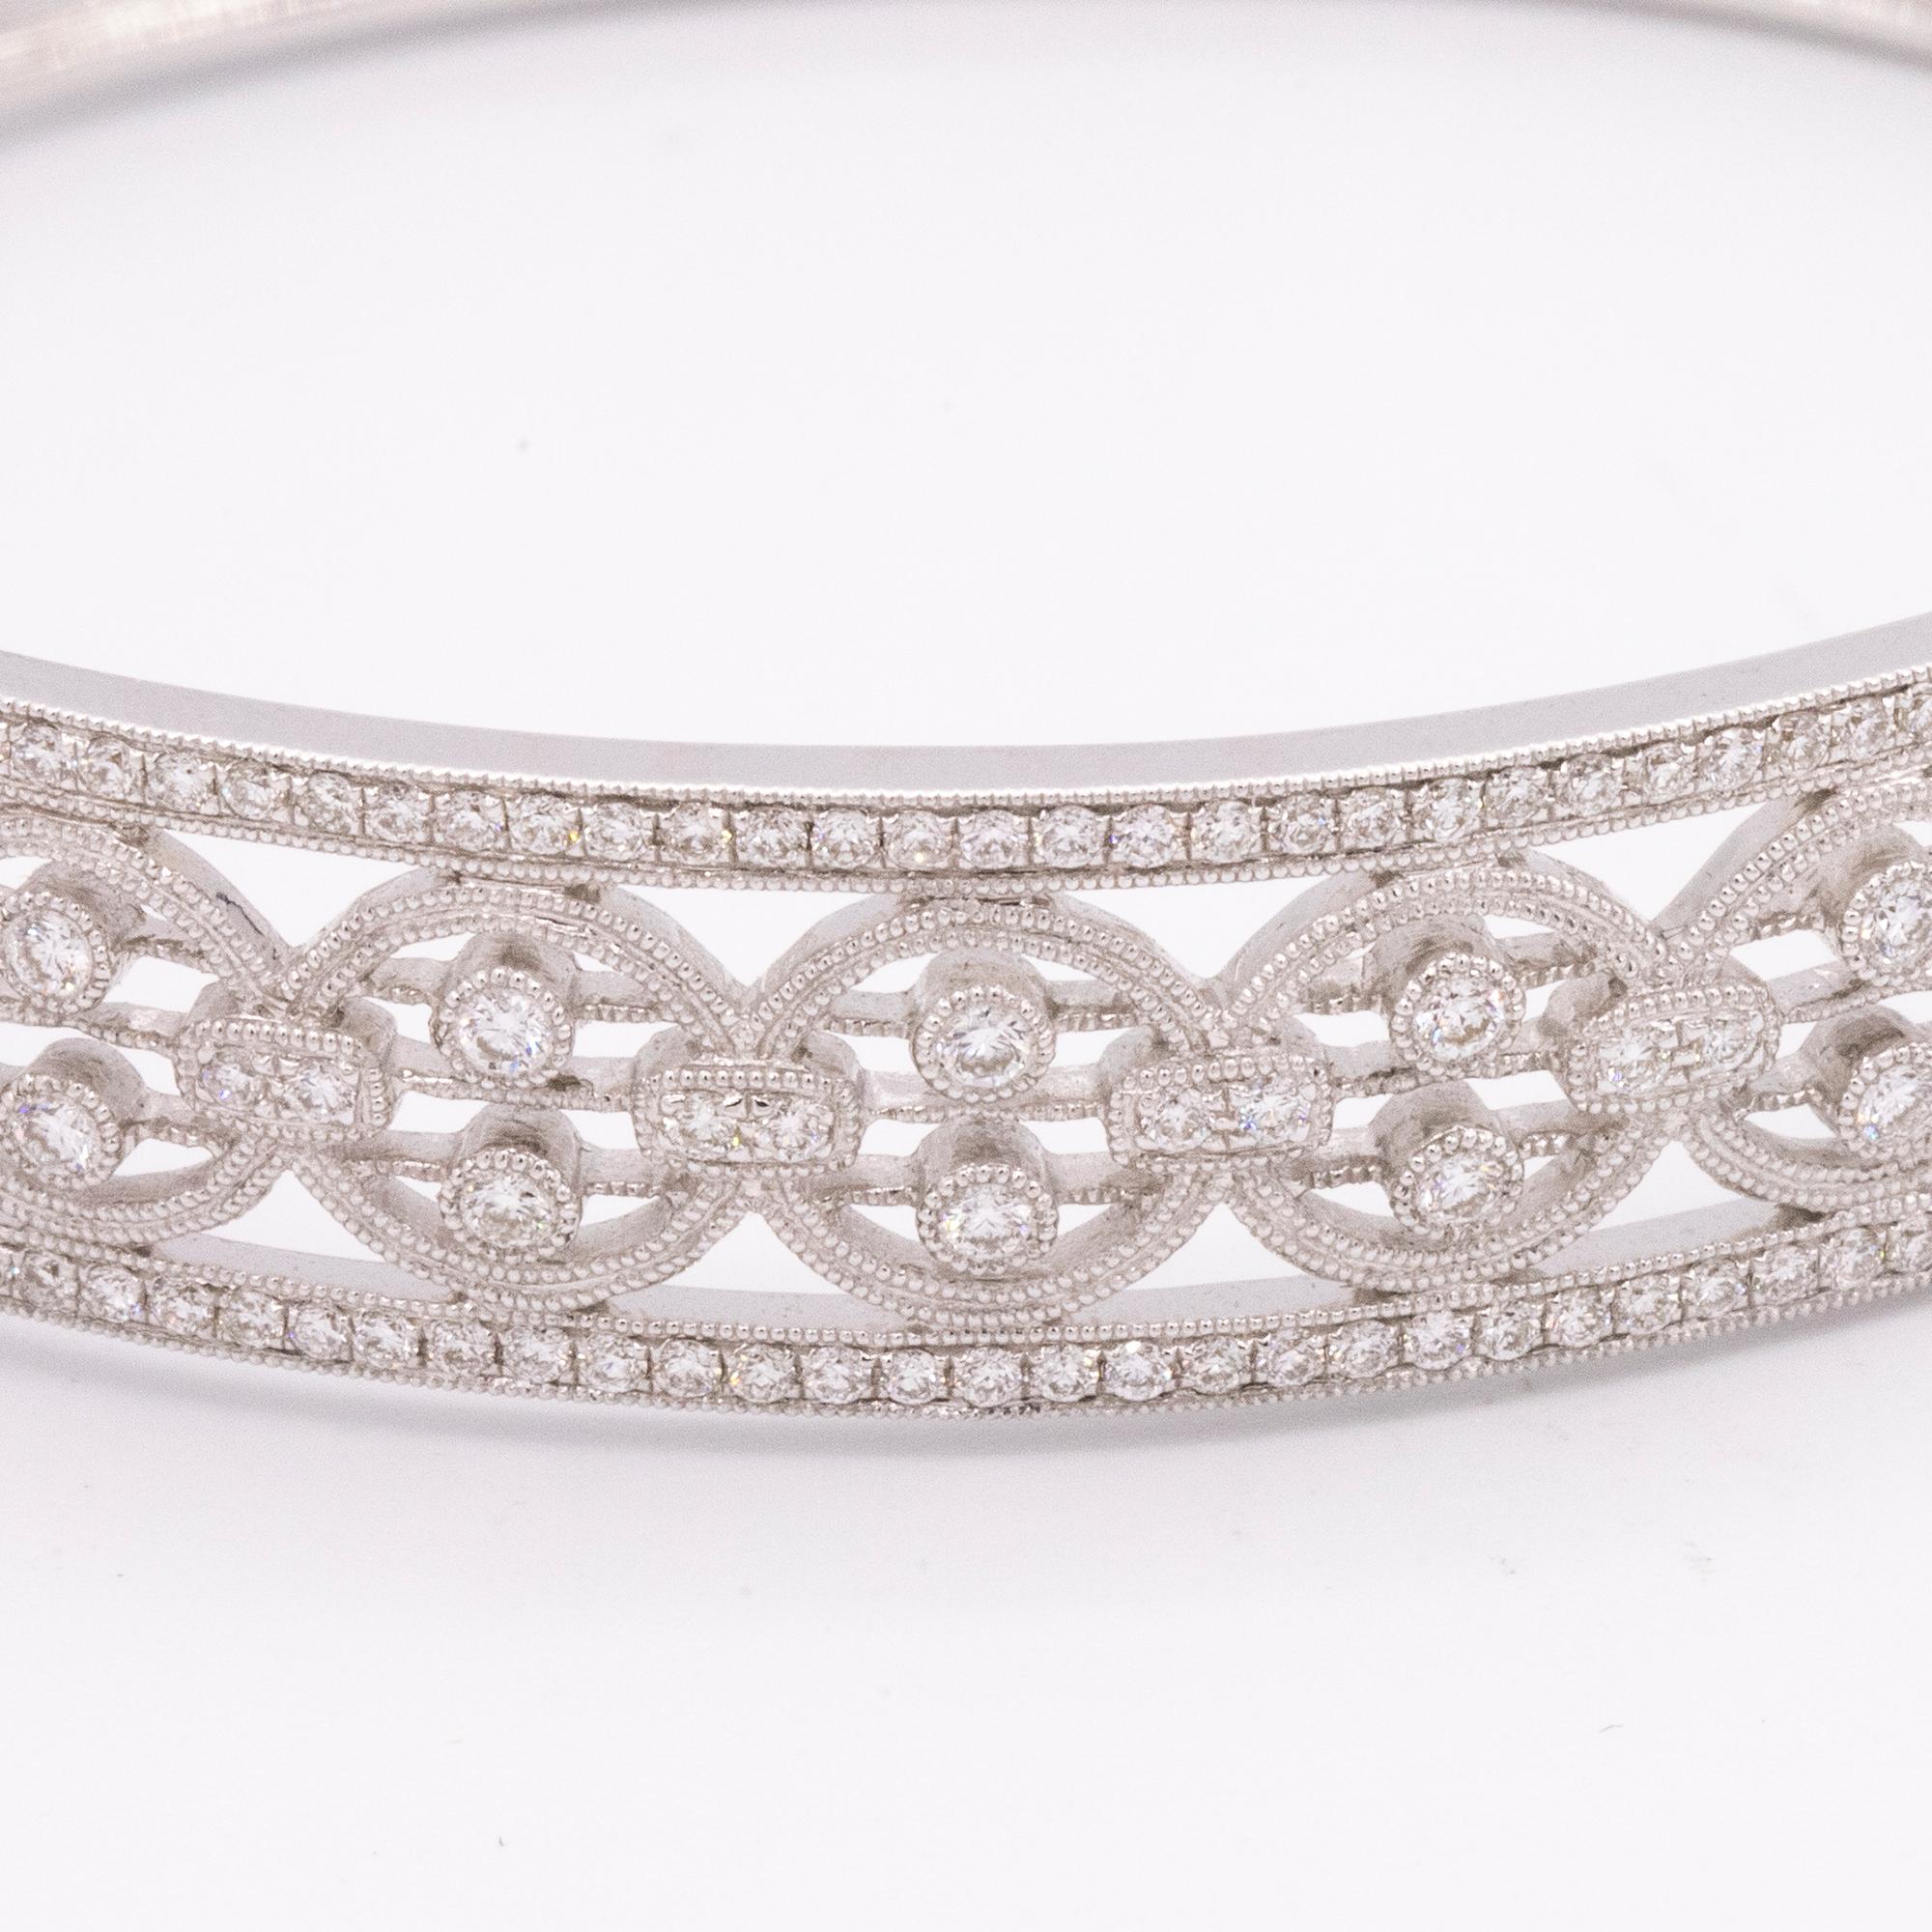 From the Hamilton Jewelers Heritage Collection, this diamond bangle bracelet combines old world details with timeless design. Beautiful filigree work and milgrain edges are in 18k white gold.  Vintage vogue meets modern elegance.

Diamonds:    213